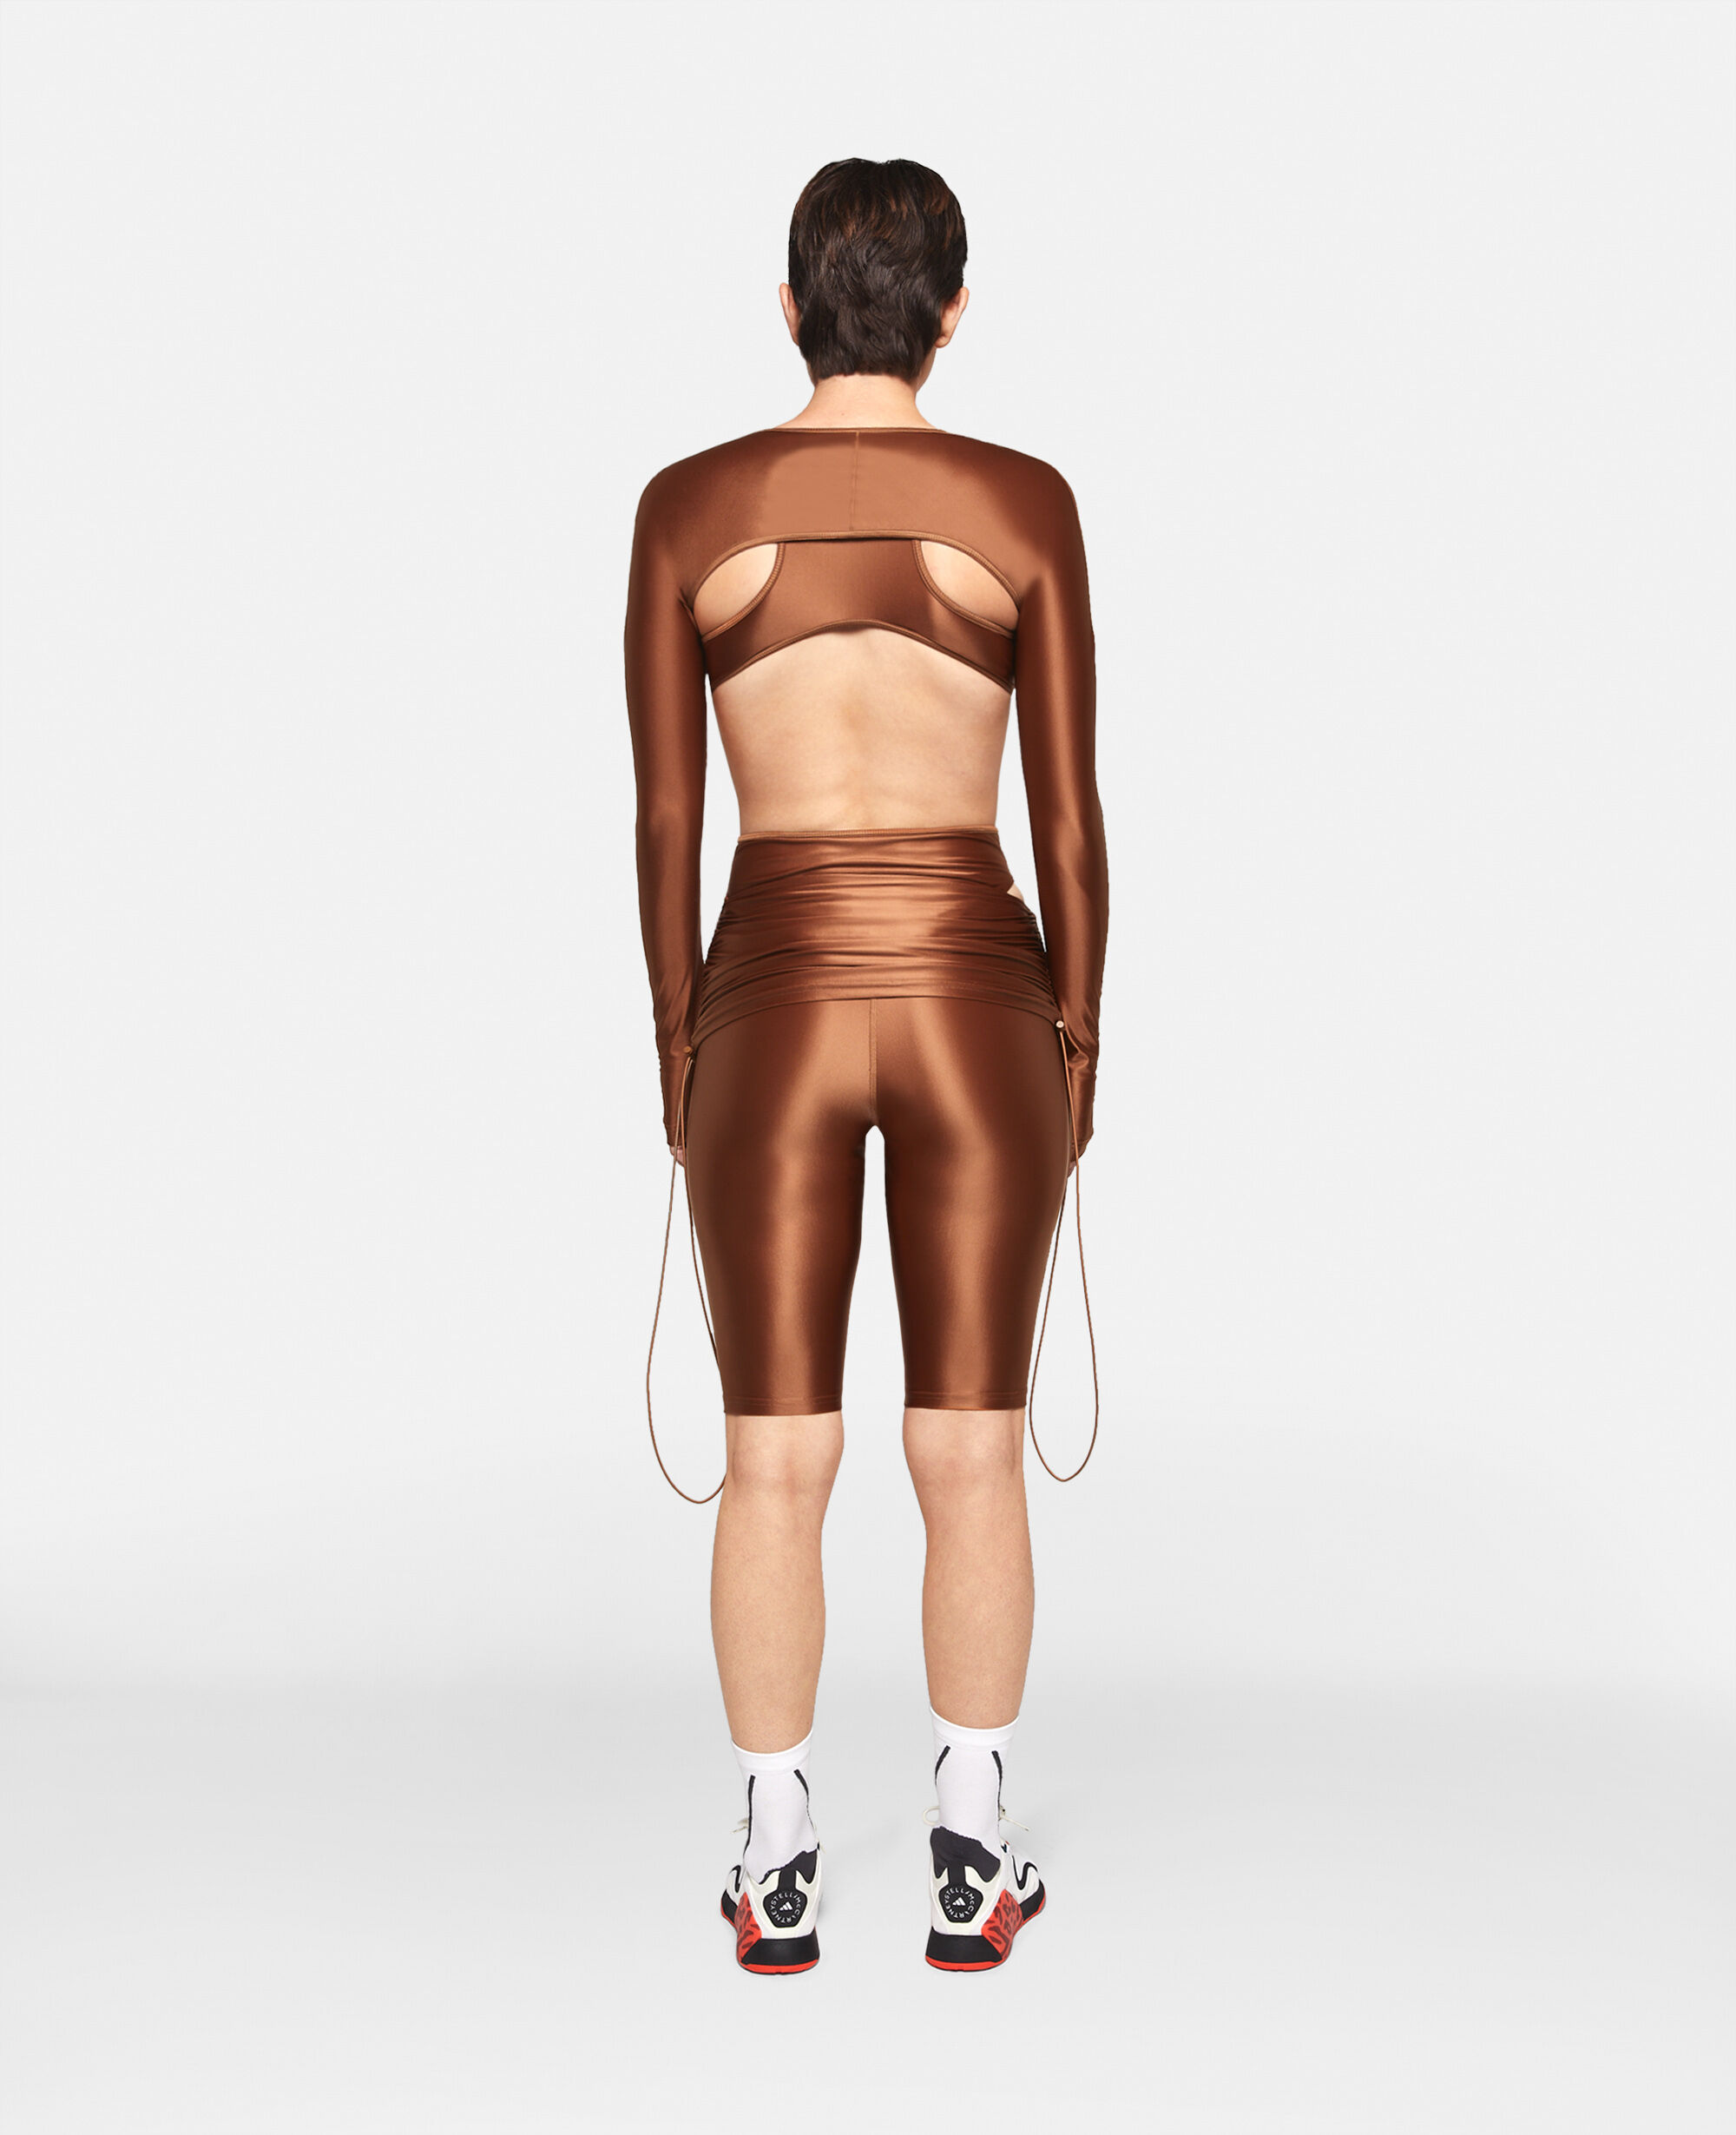 Women's Sports Collection | Adidas By Stella McCartney PT